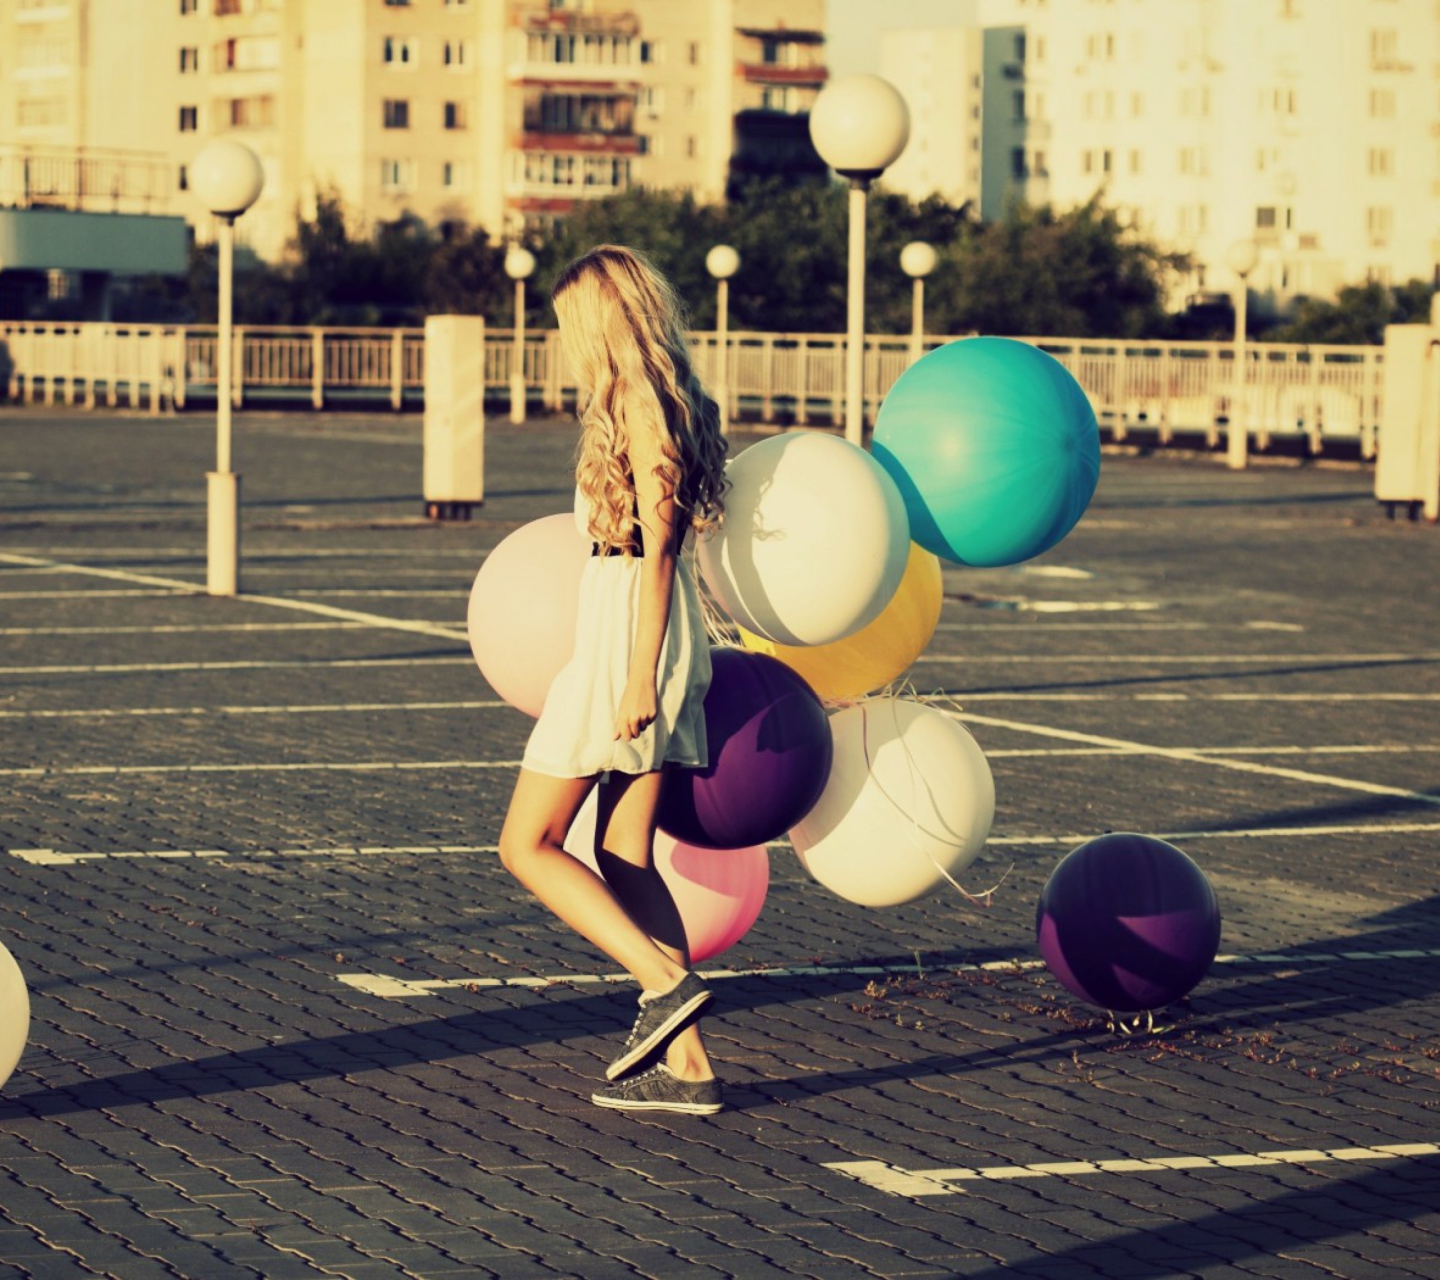 Happy Girl With Colorful Balloons screenshot #1 1440x1280